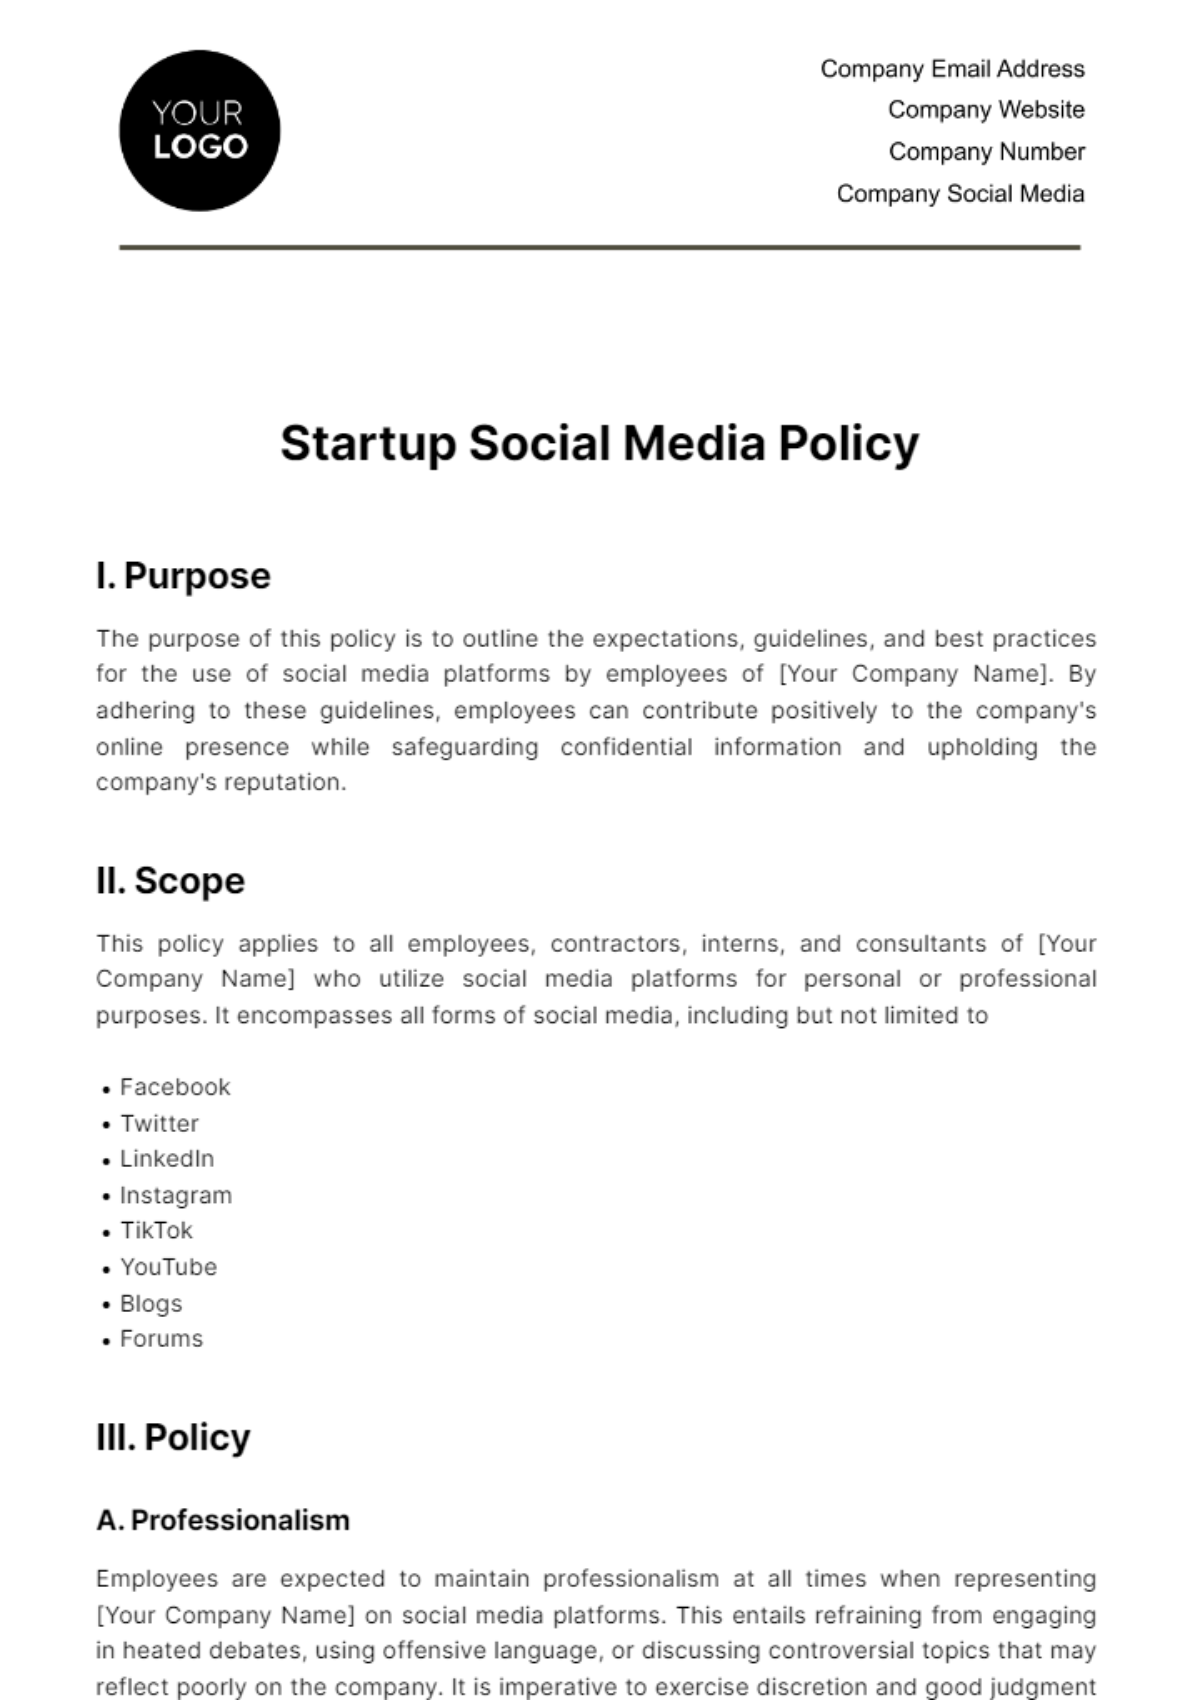 Startup Social Media Policy Template